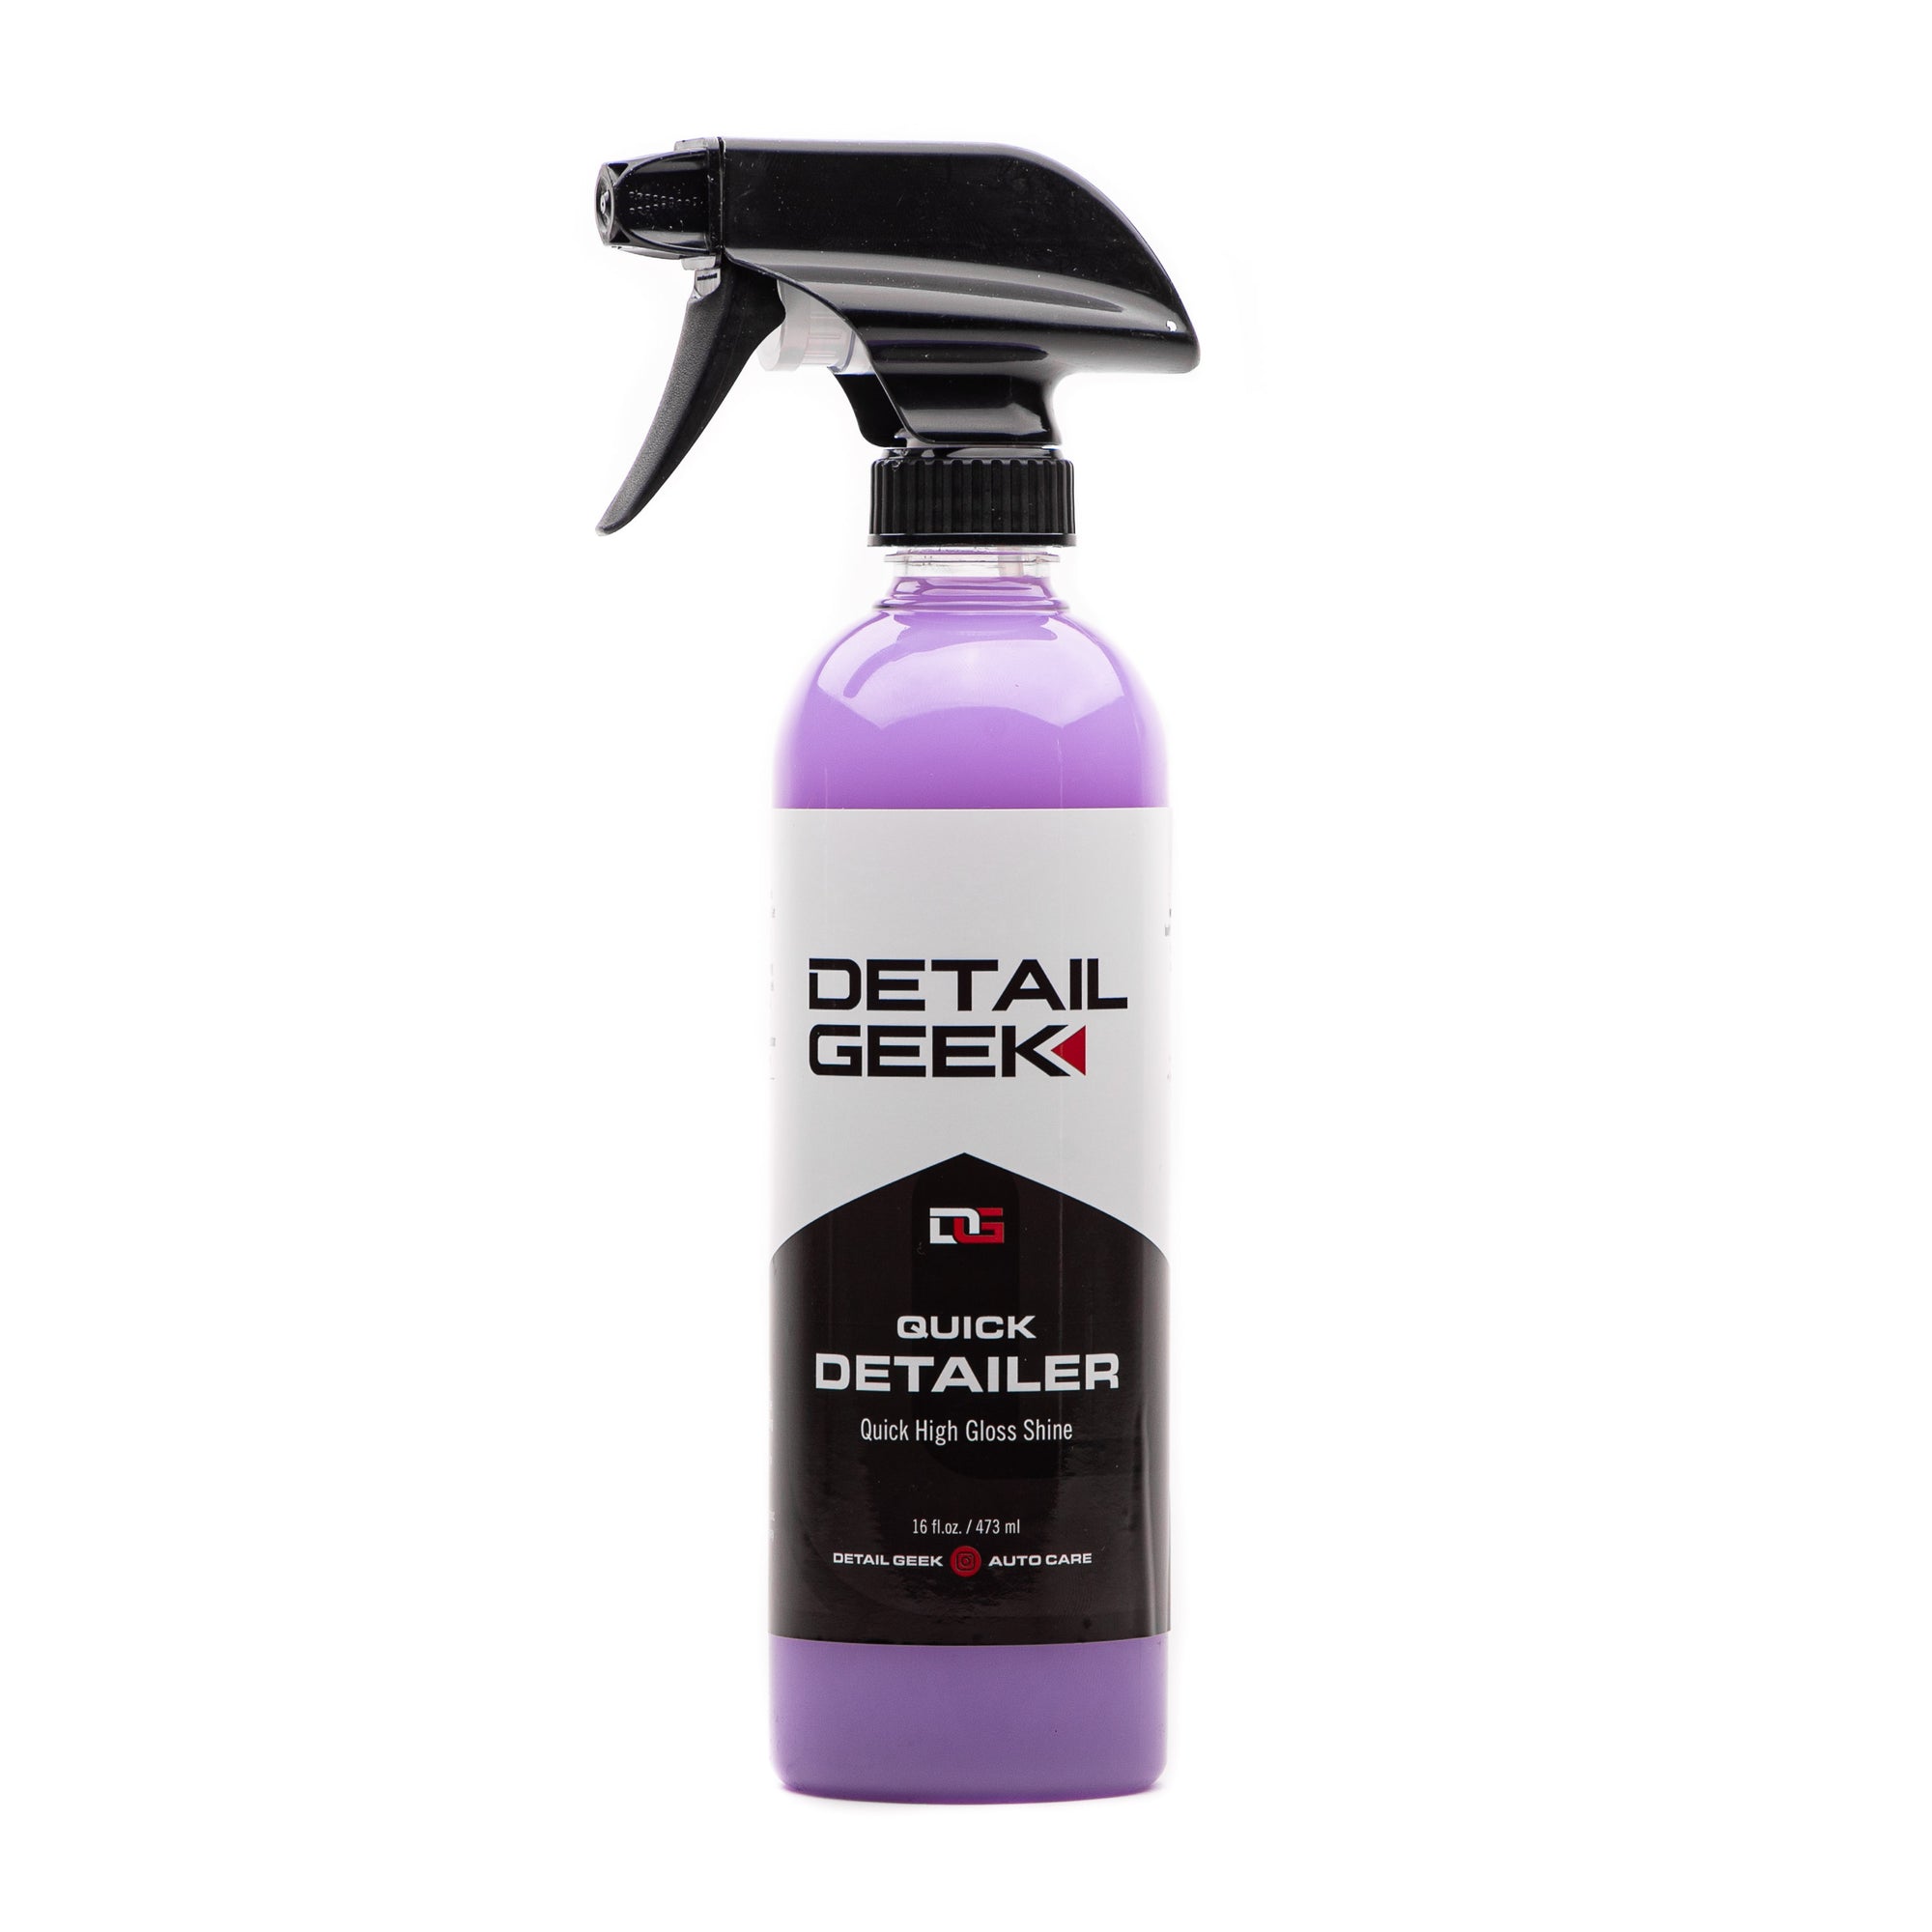 Detail Geek Quick Detailer for adding quick shine to vehicle paint protection quick high gloss shine for car or truck paint